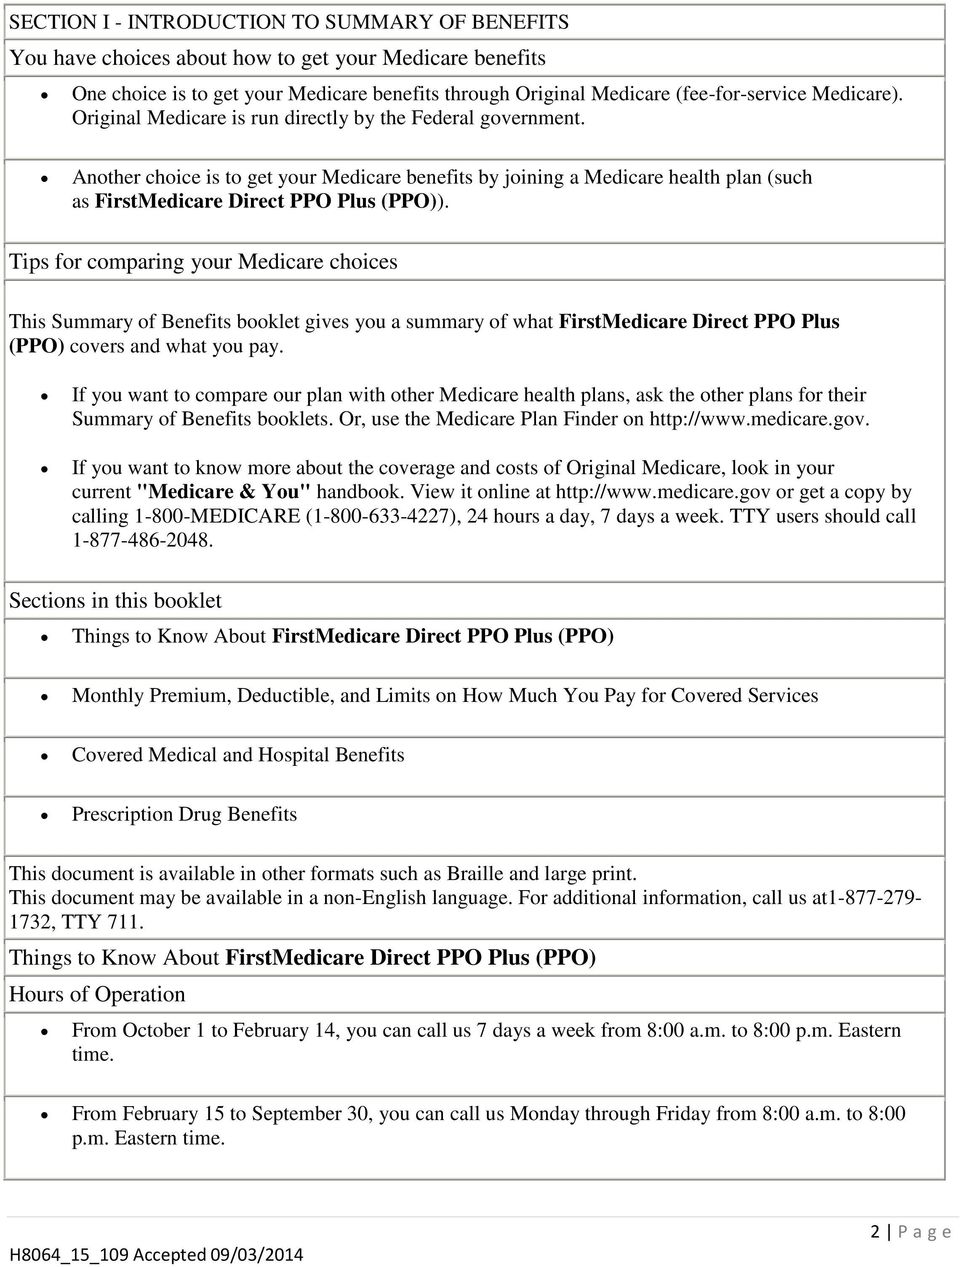 Tips for comparing your Medicare choices This Summary of Benefits booklet gives you a summary of what FirstMedicare Direct PPO Plus (PPO) covers and what you pay.